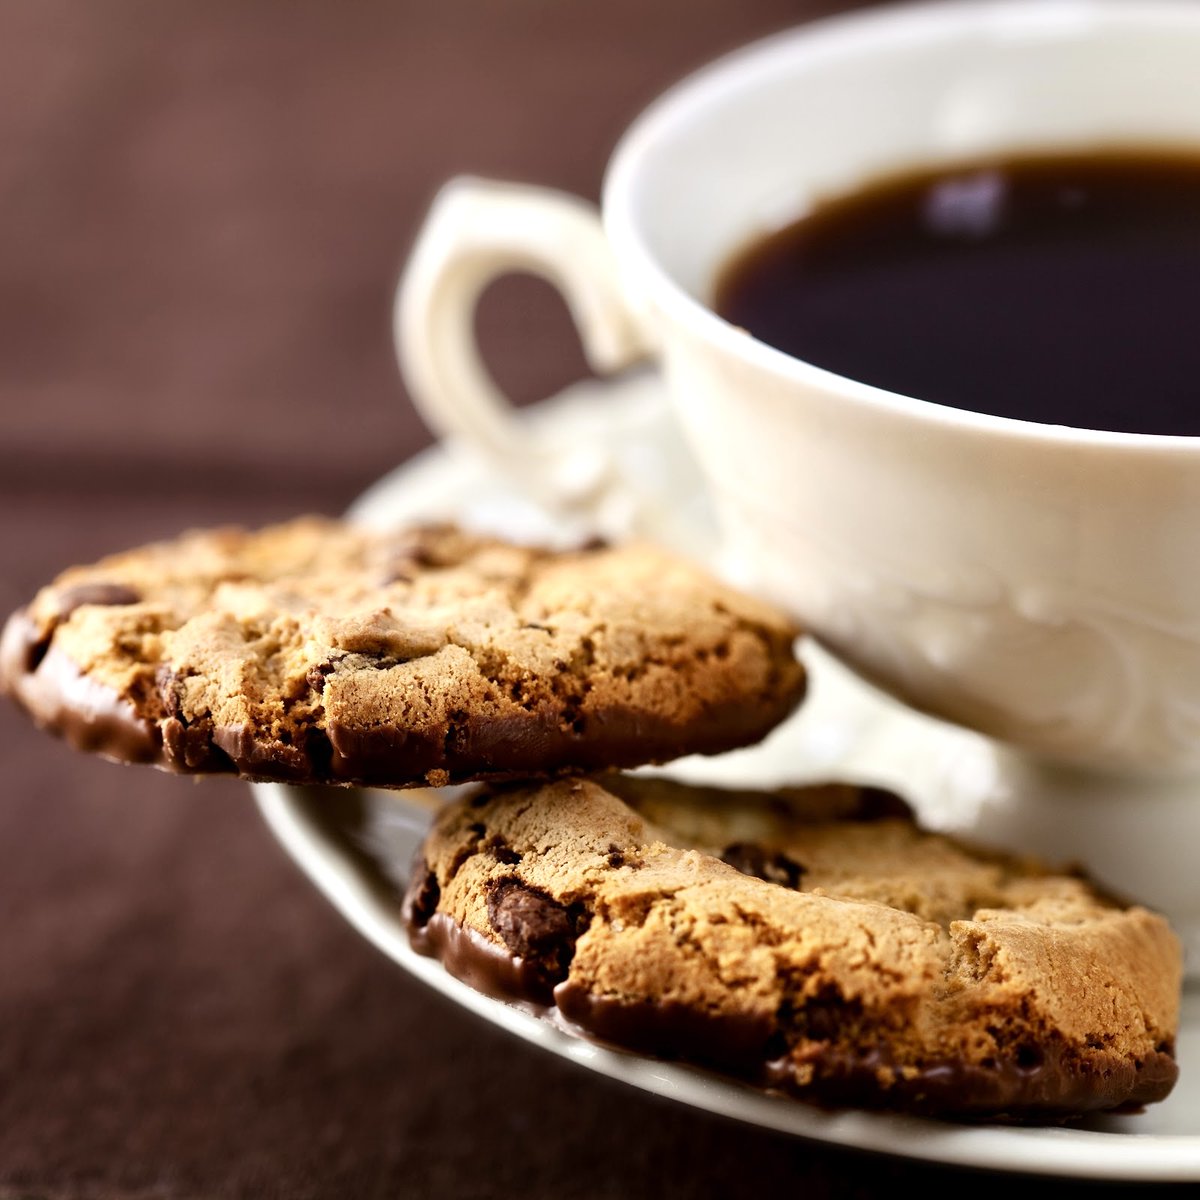 Dunk, sip, and celebrate – it’s #NationalCookieDay! 🍪☕ Indulge in the perfect pairing of coffee and cookies. Are you team crunchy cookie or soft cookie? Let us know! 👇🏽